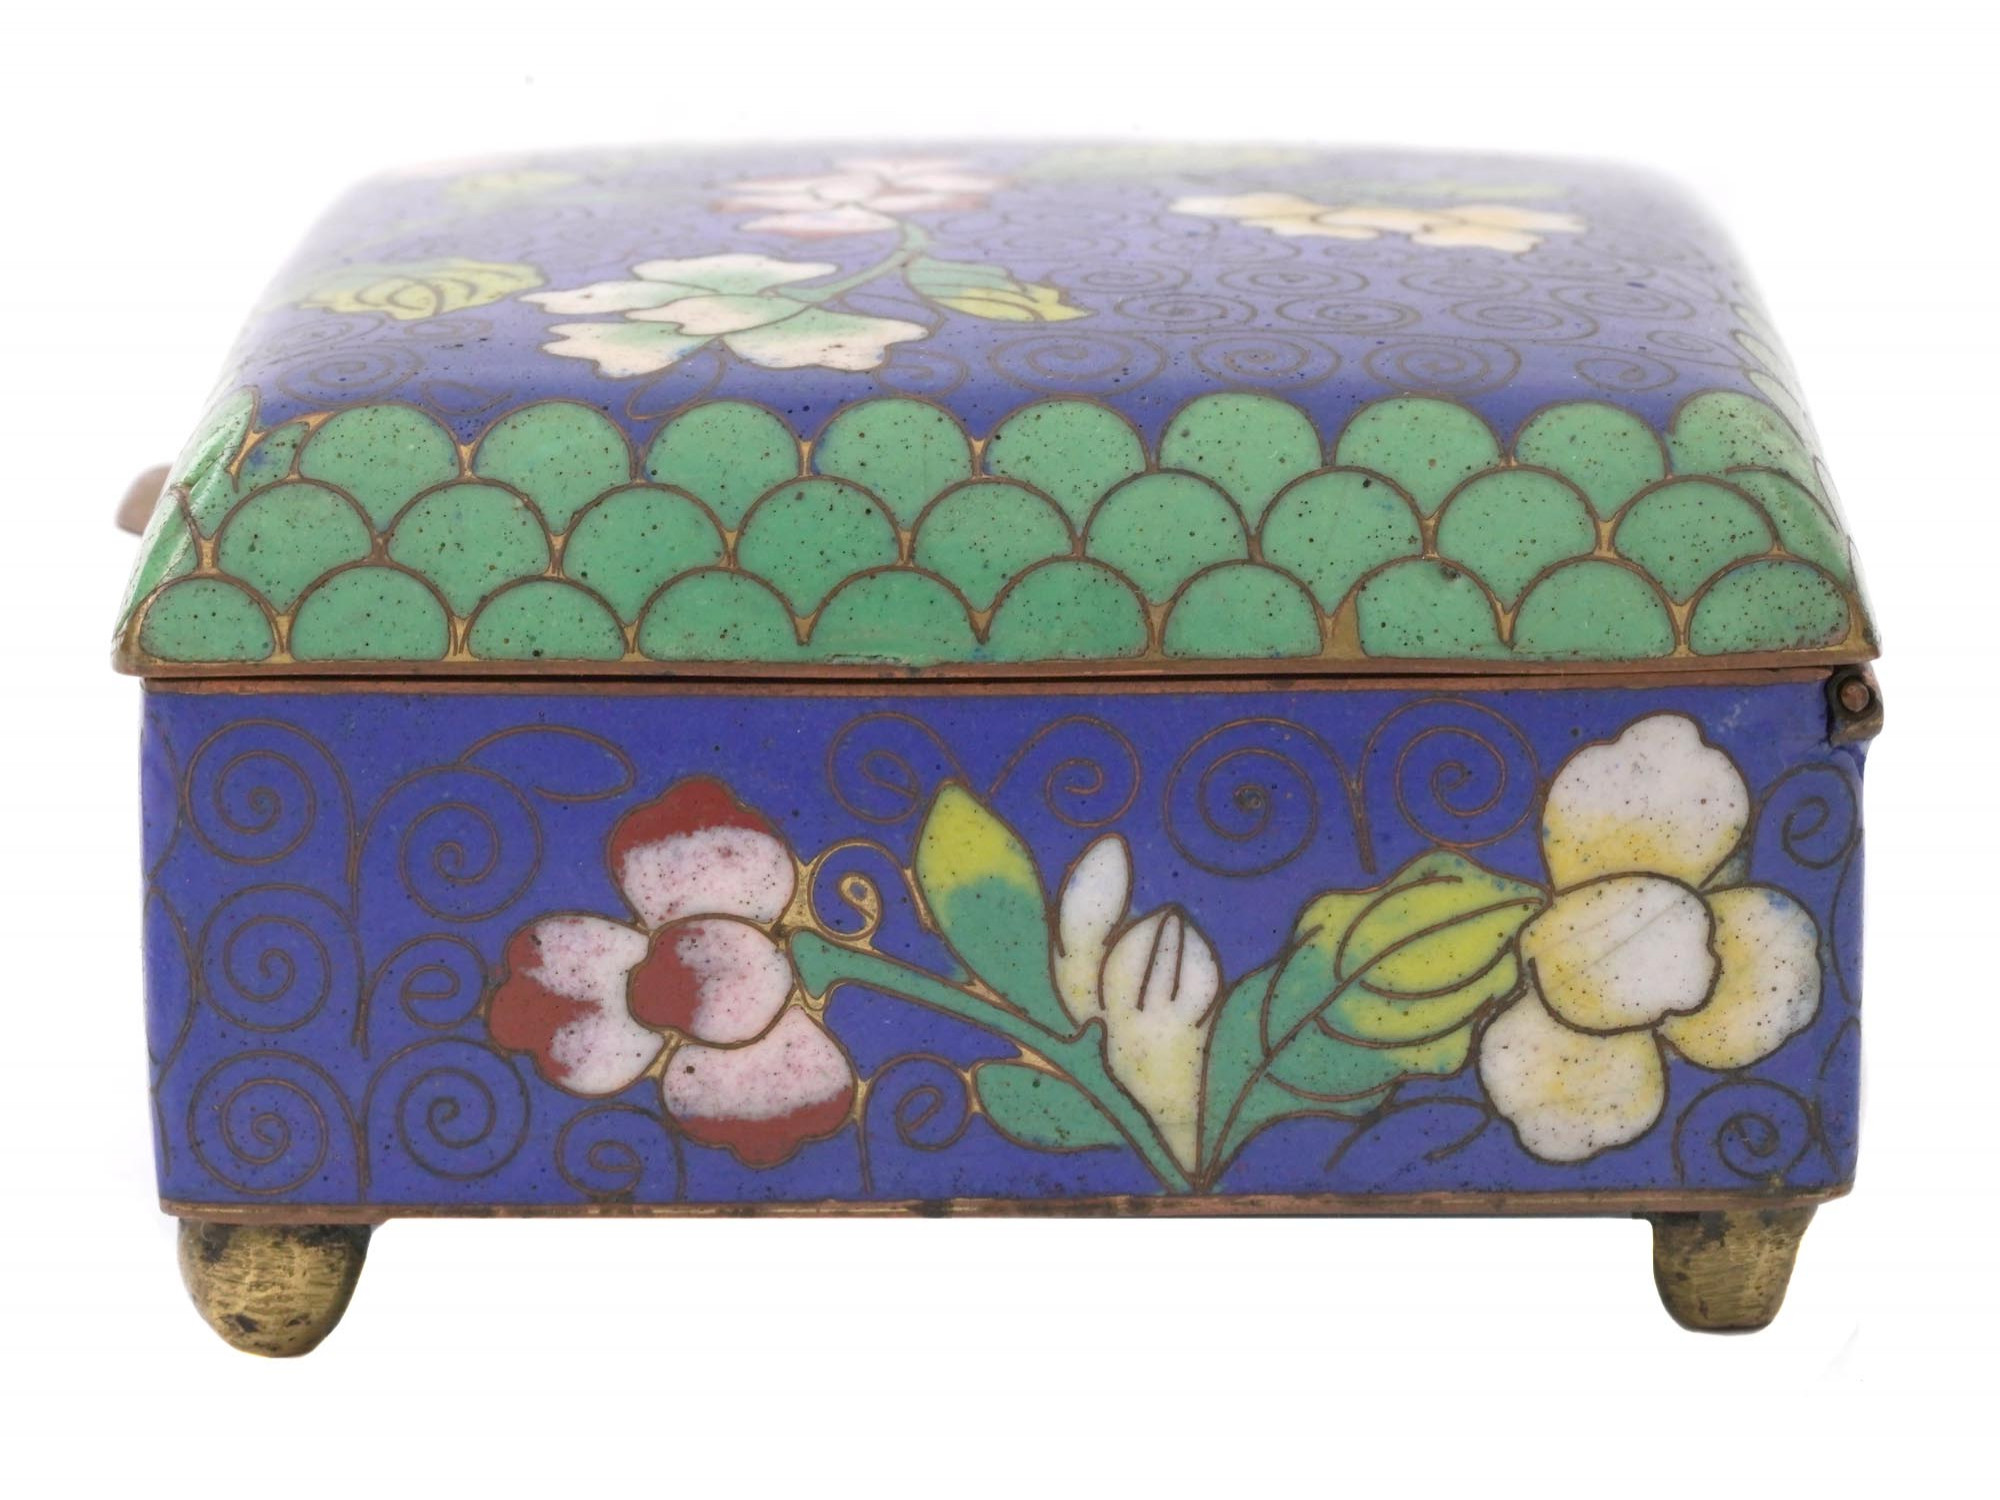 ANTIQUE CHINESE COVERED FLORAL CLOISONNE ENAMEL BOX PIC-3